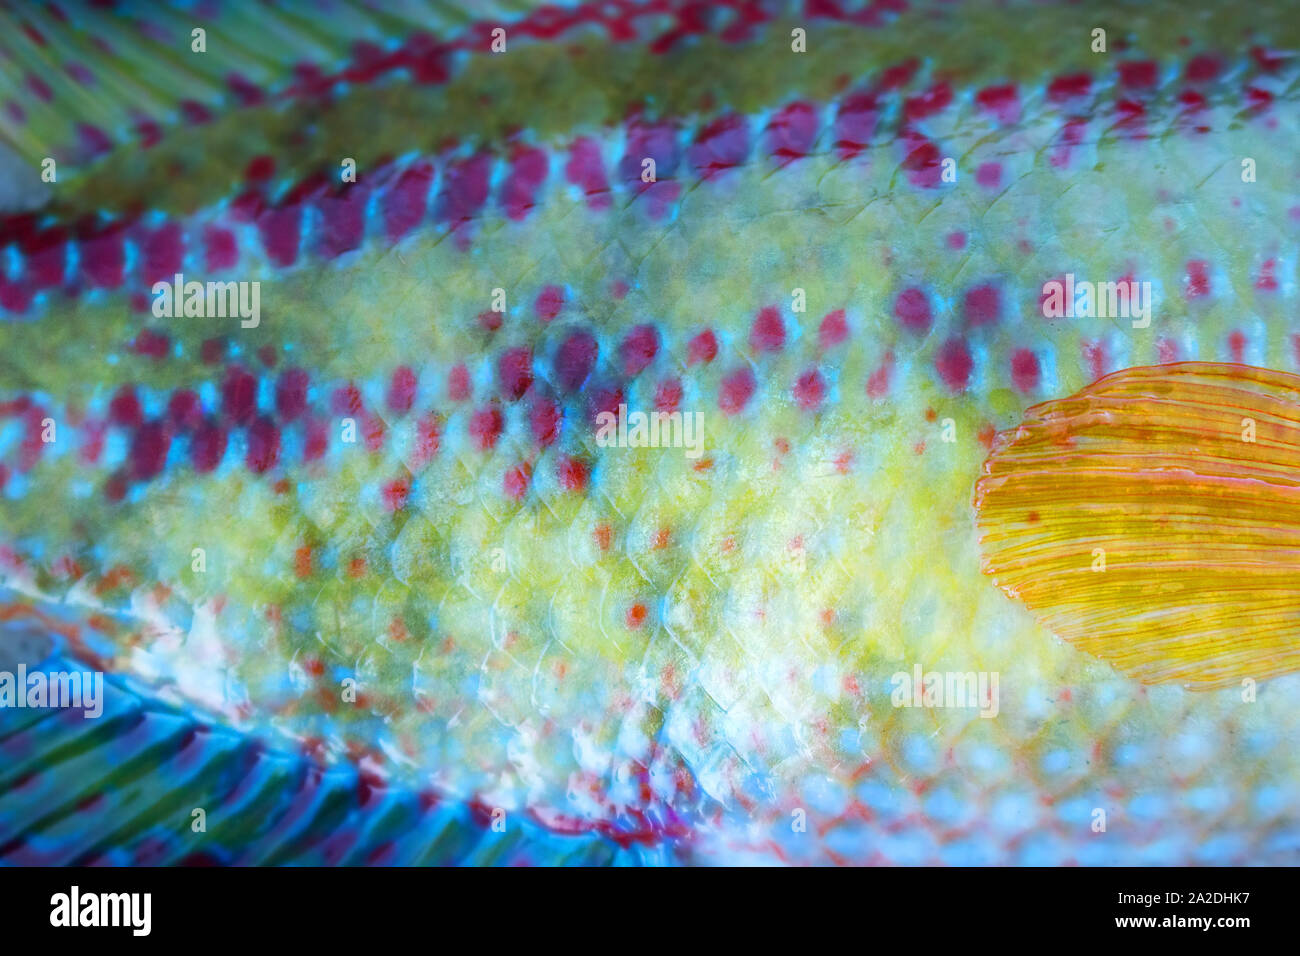 Long-striped wrasse (Symphodus tinca, rainbow fishes, Labrus, ray-finned fish) from the Black sea (North shore). Multi-colored scales and fins, as if Stock Photo